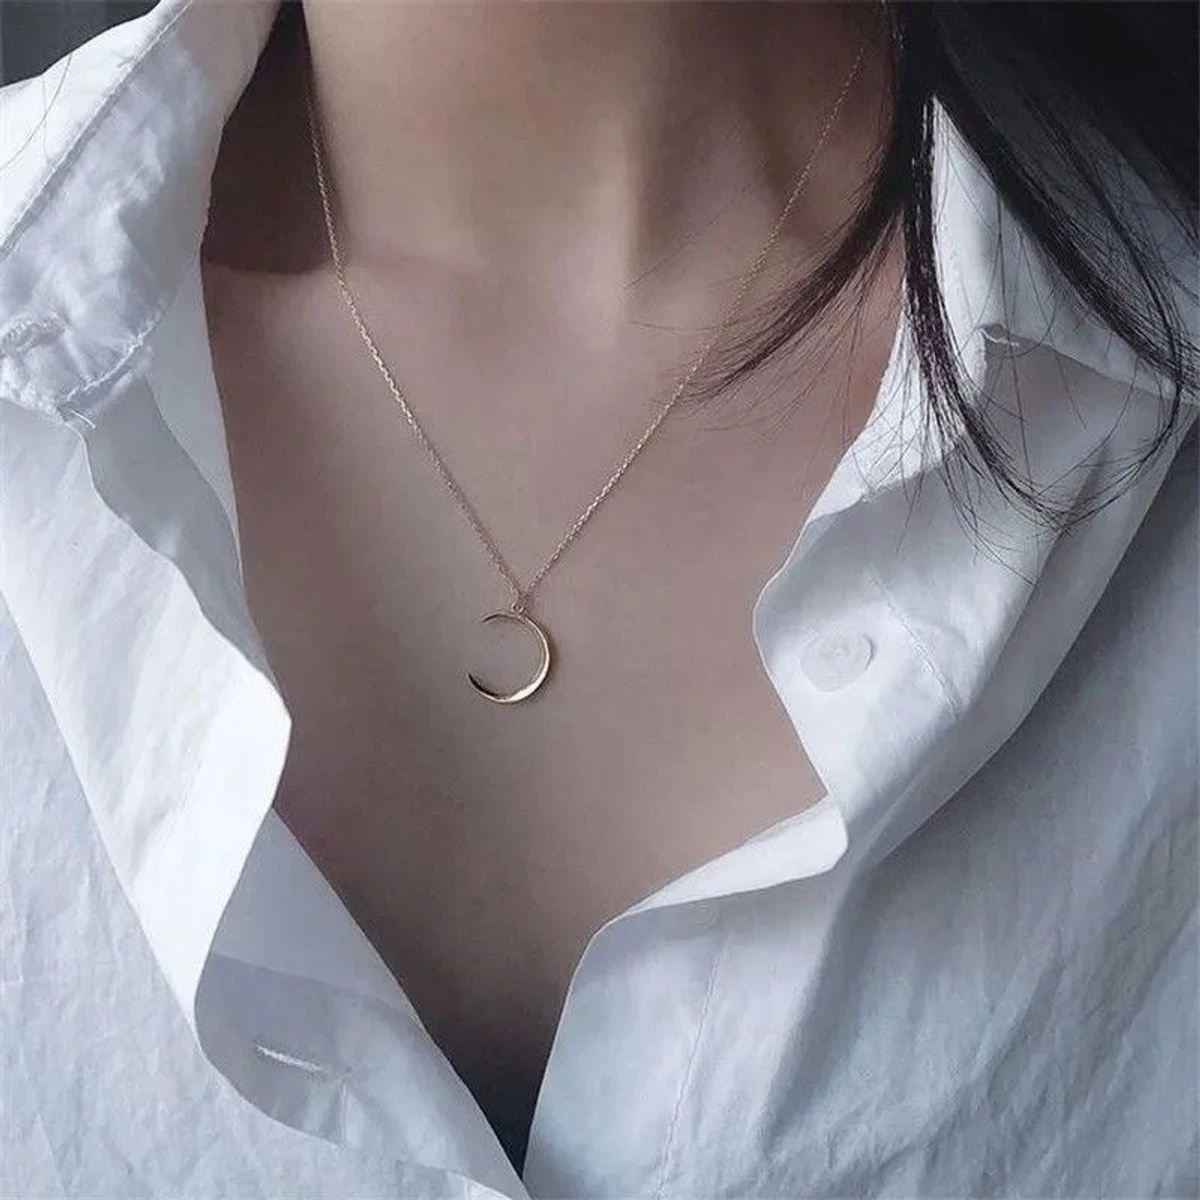 Stylish New Moon Necklace For Girl/Women